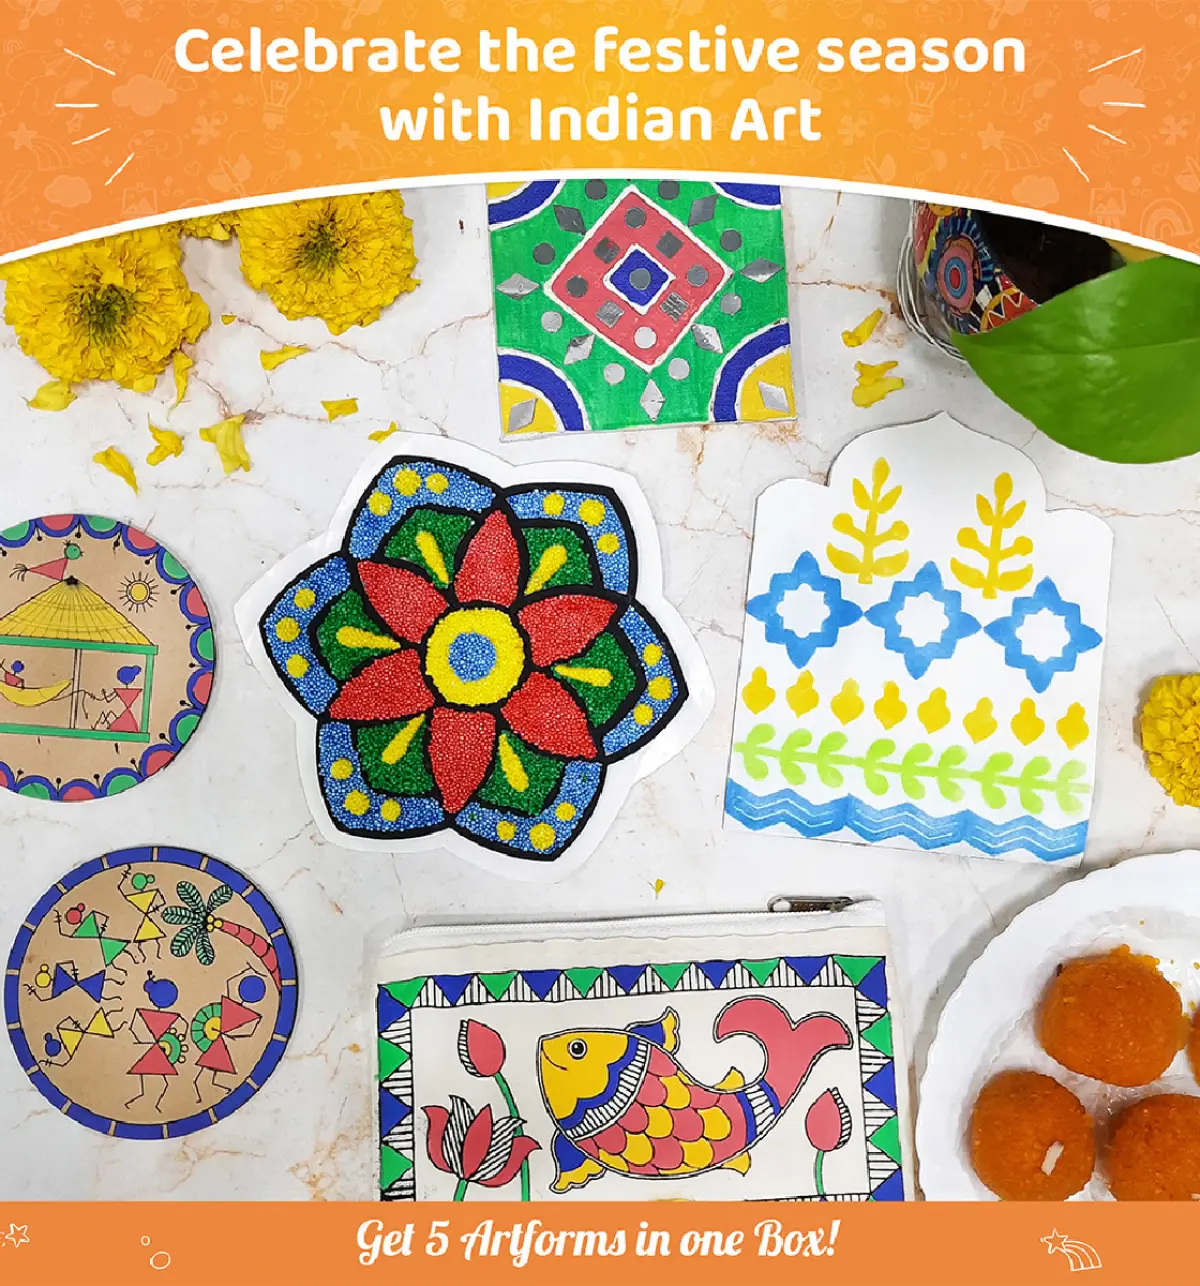 12 Indian Arts & Crafts you can Learn at Home